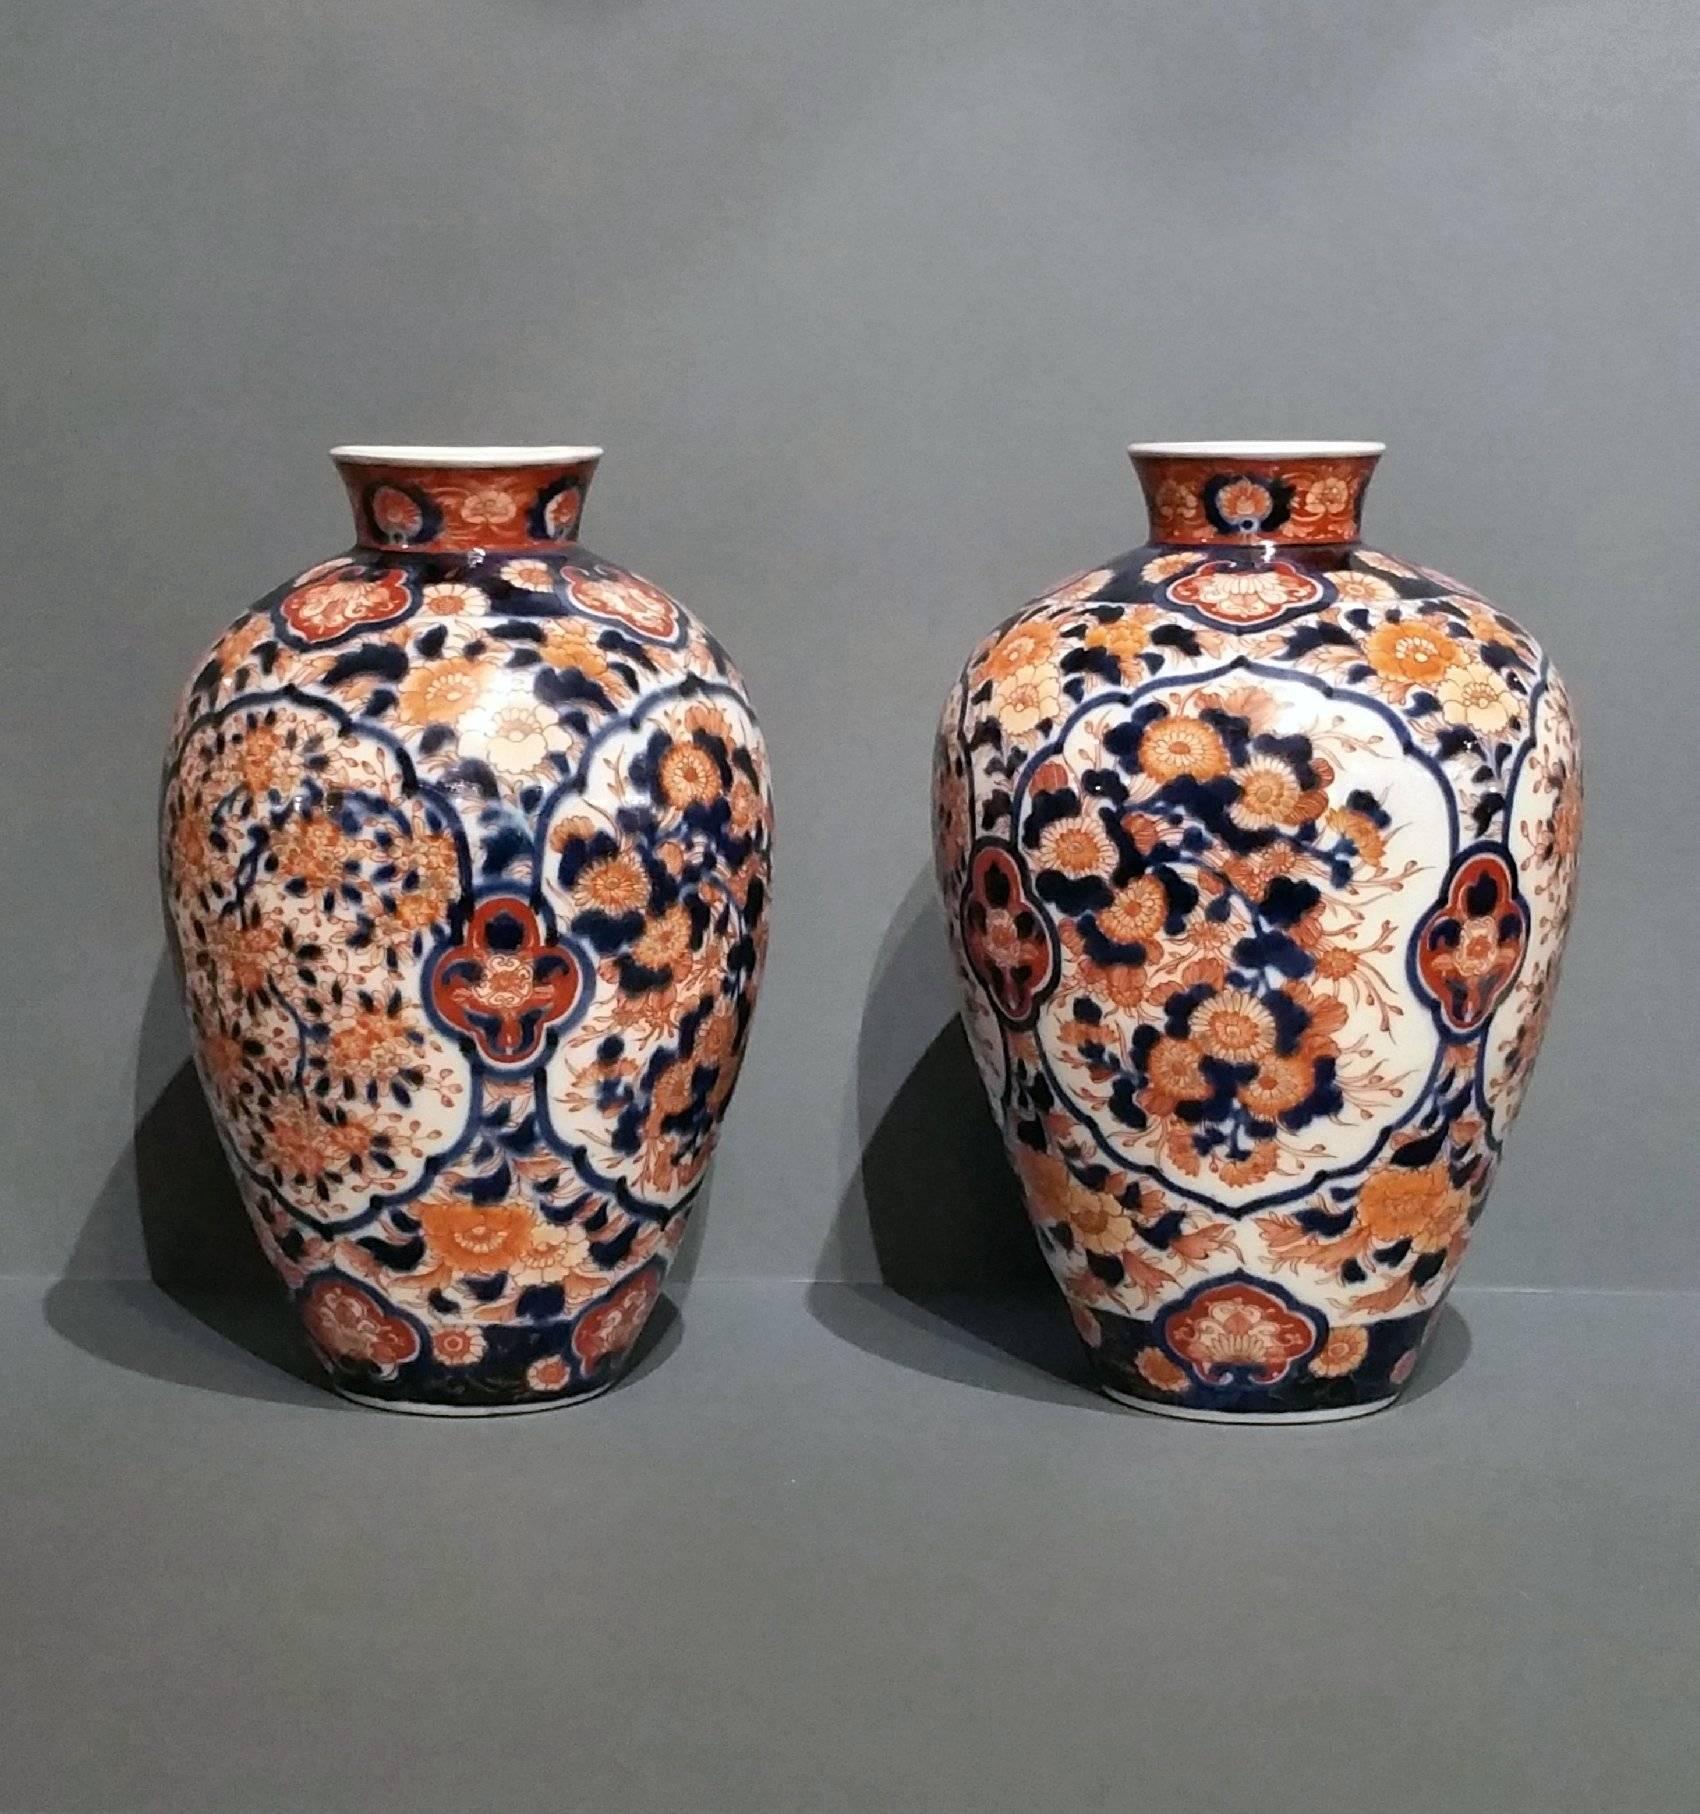 This attractive pair of amphora Imari vases features a profuse chrysanthemum and leaf inspired design in dark blue, orange and white. The vases each measure approximately 7 in – 18 cm in diameter and 10 ½ in – 26.5 cm high.